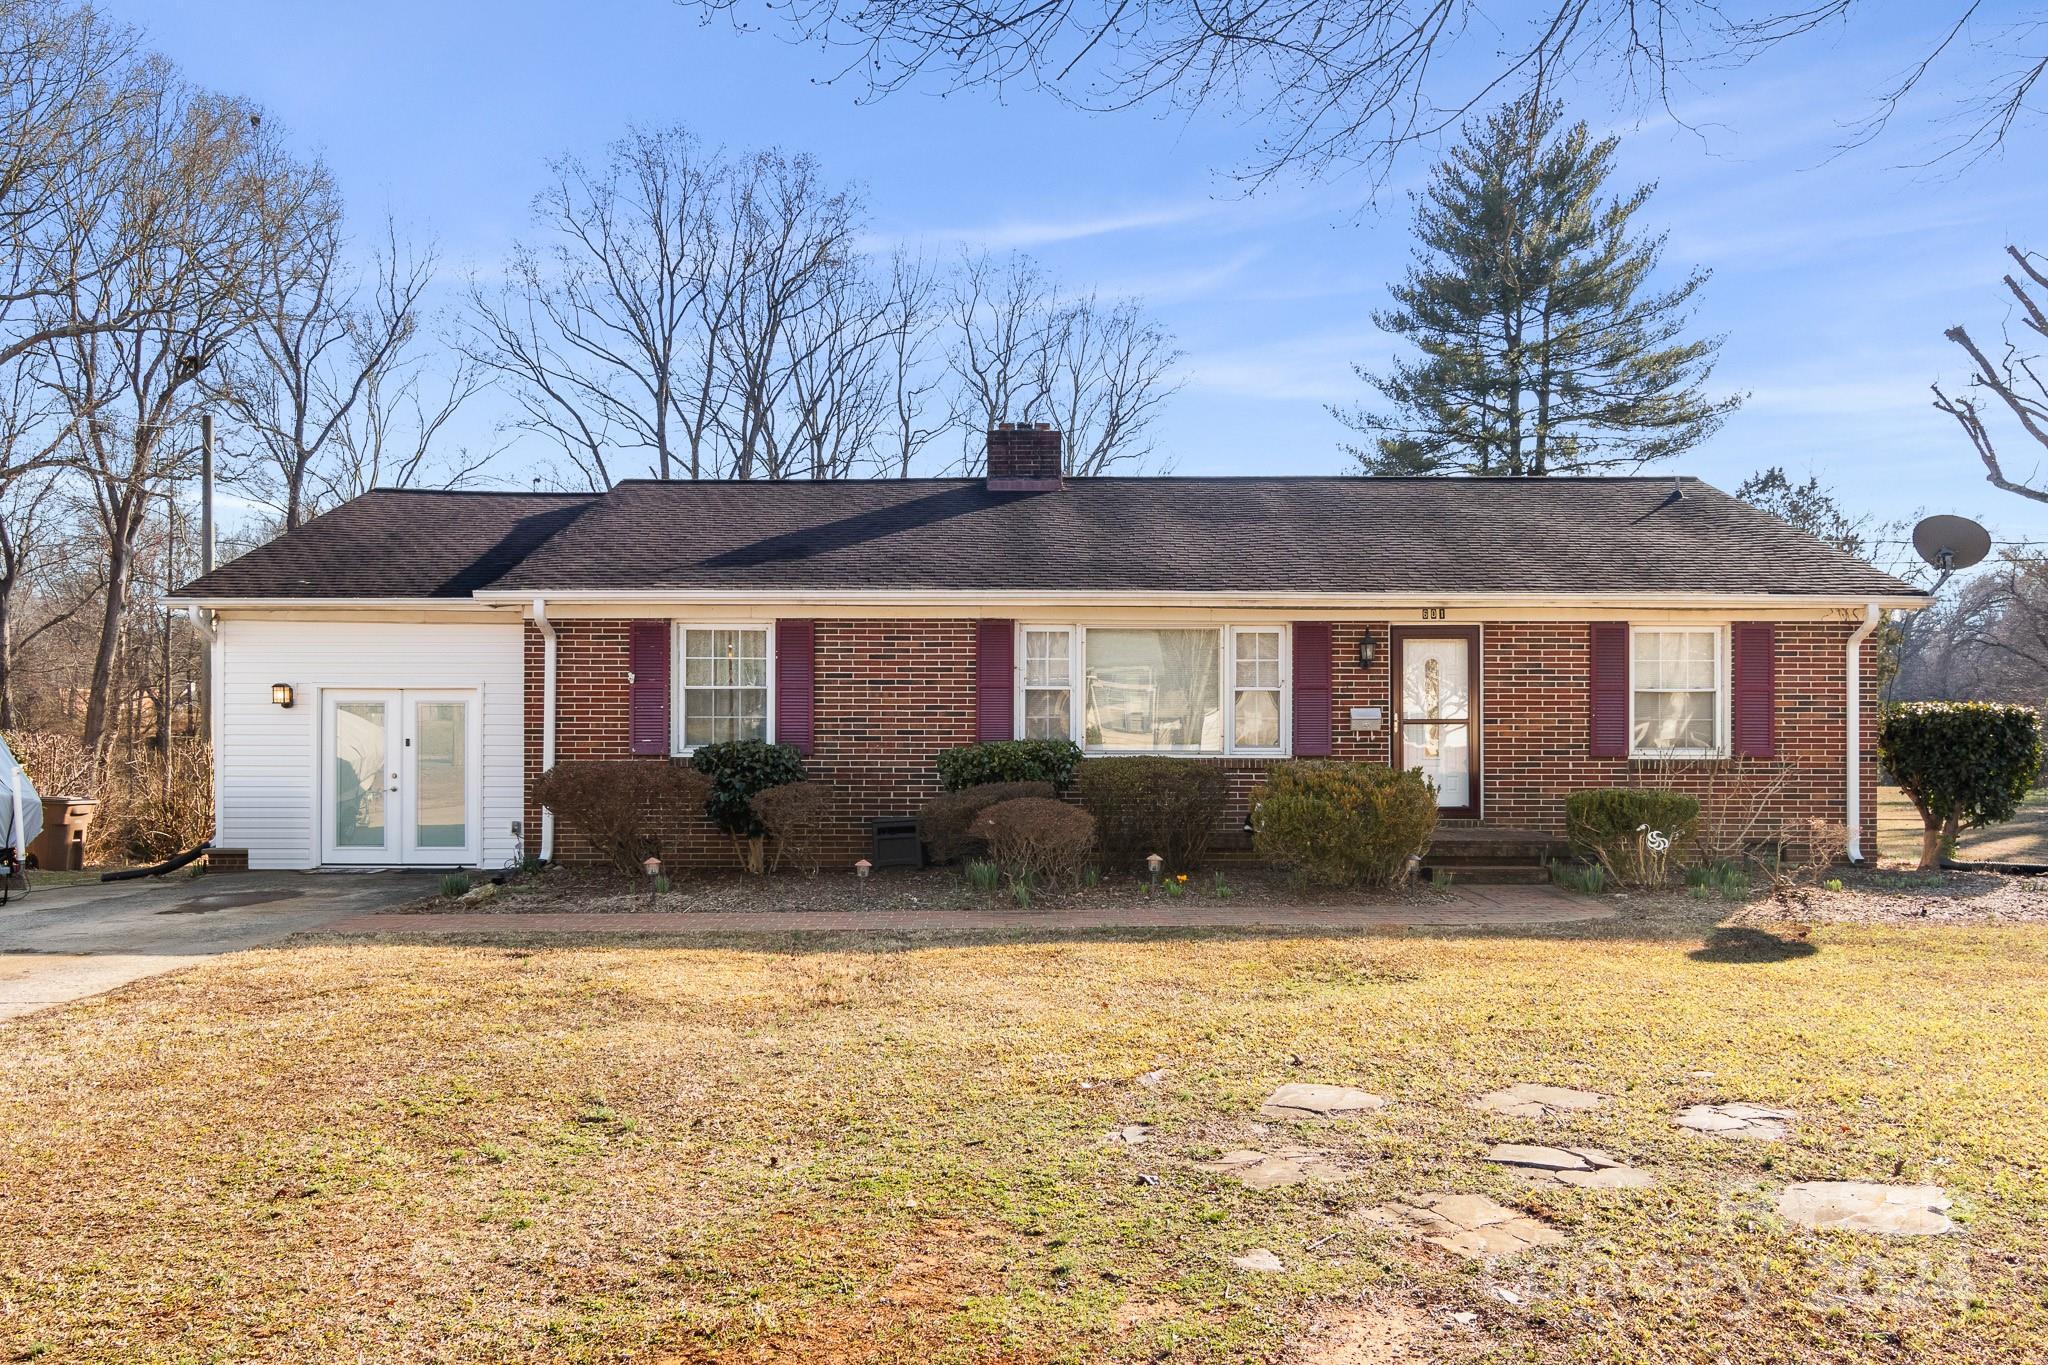 Photo one of 601 Broad St Shelby NC 28152 | MLS 4109764